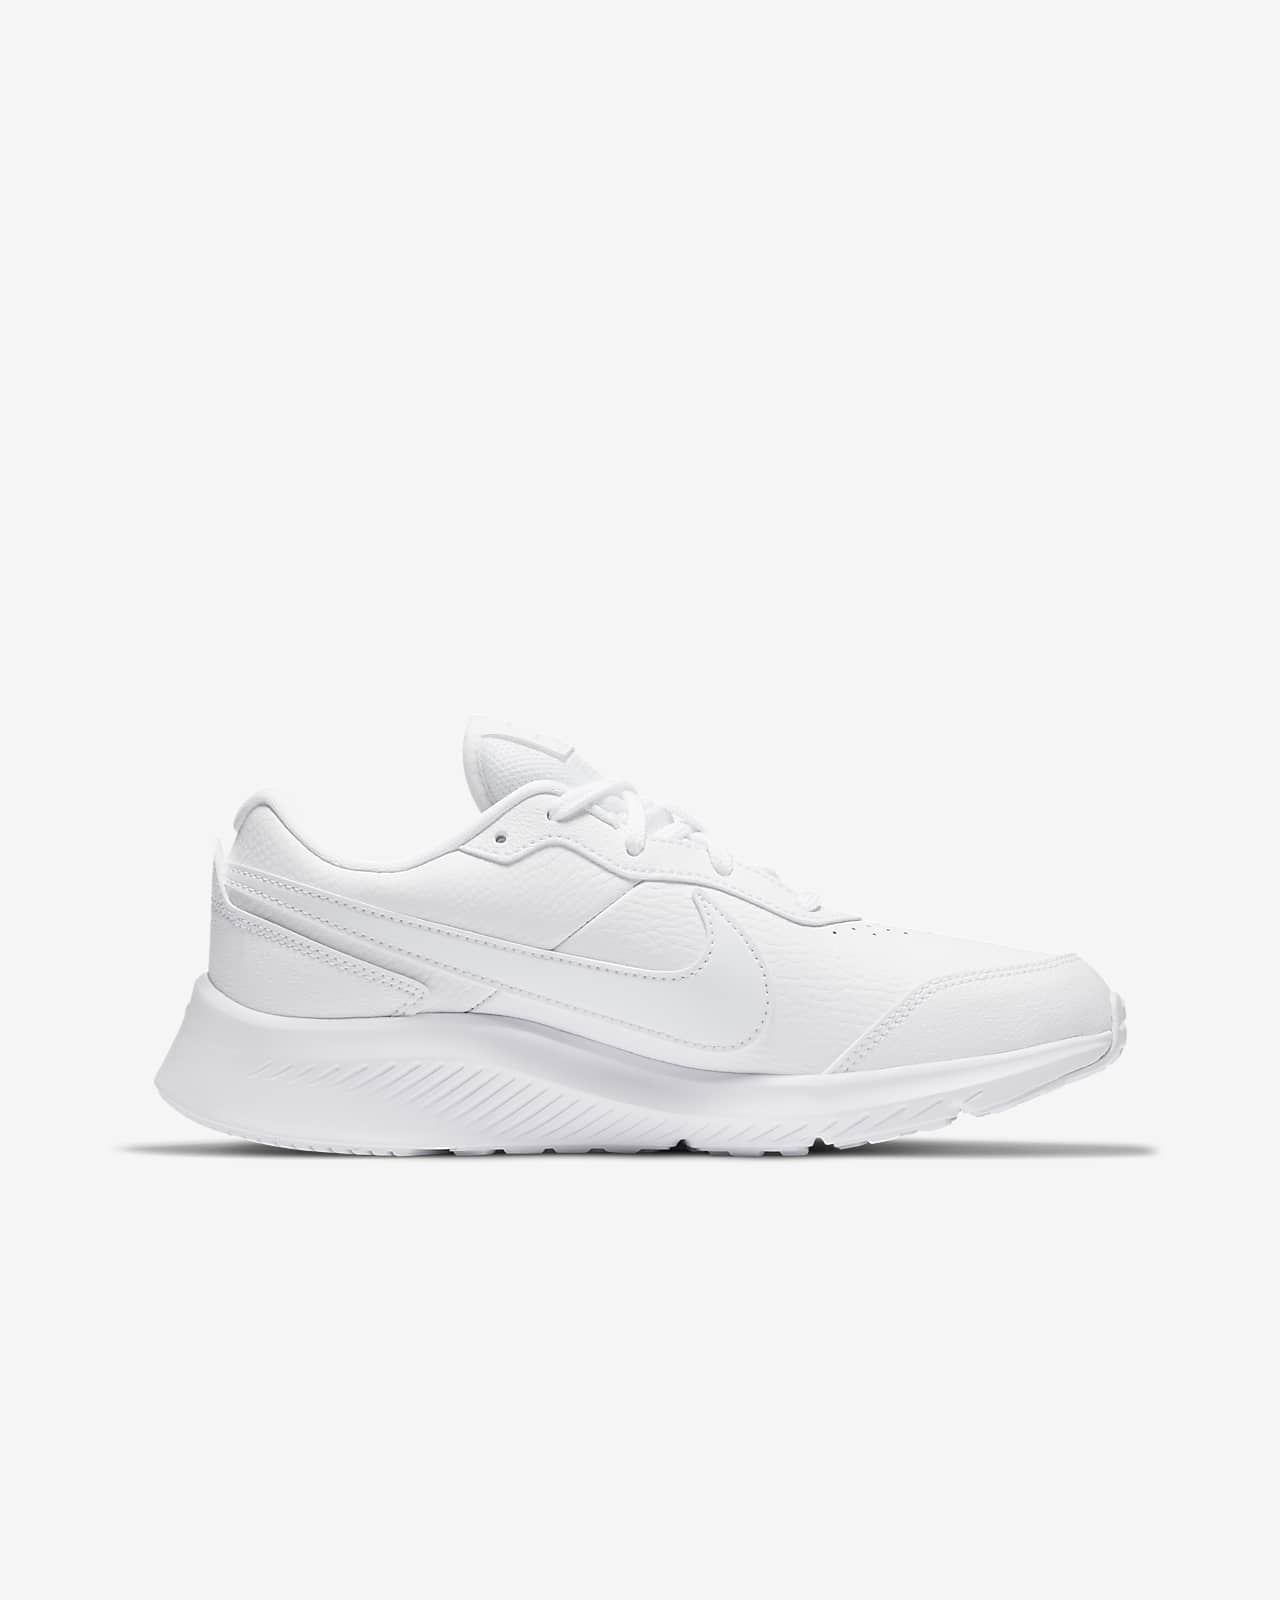 white nike shoes for boy kid